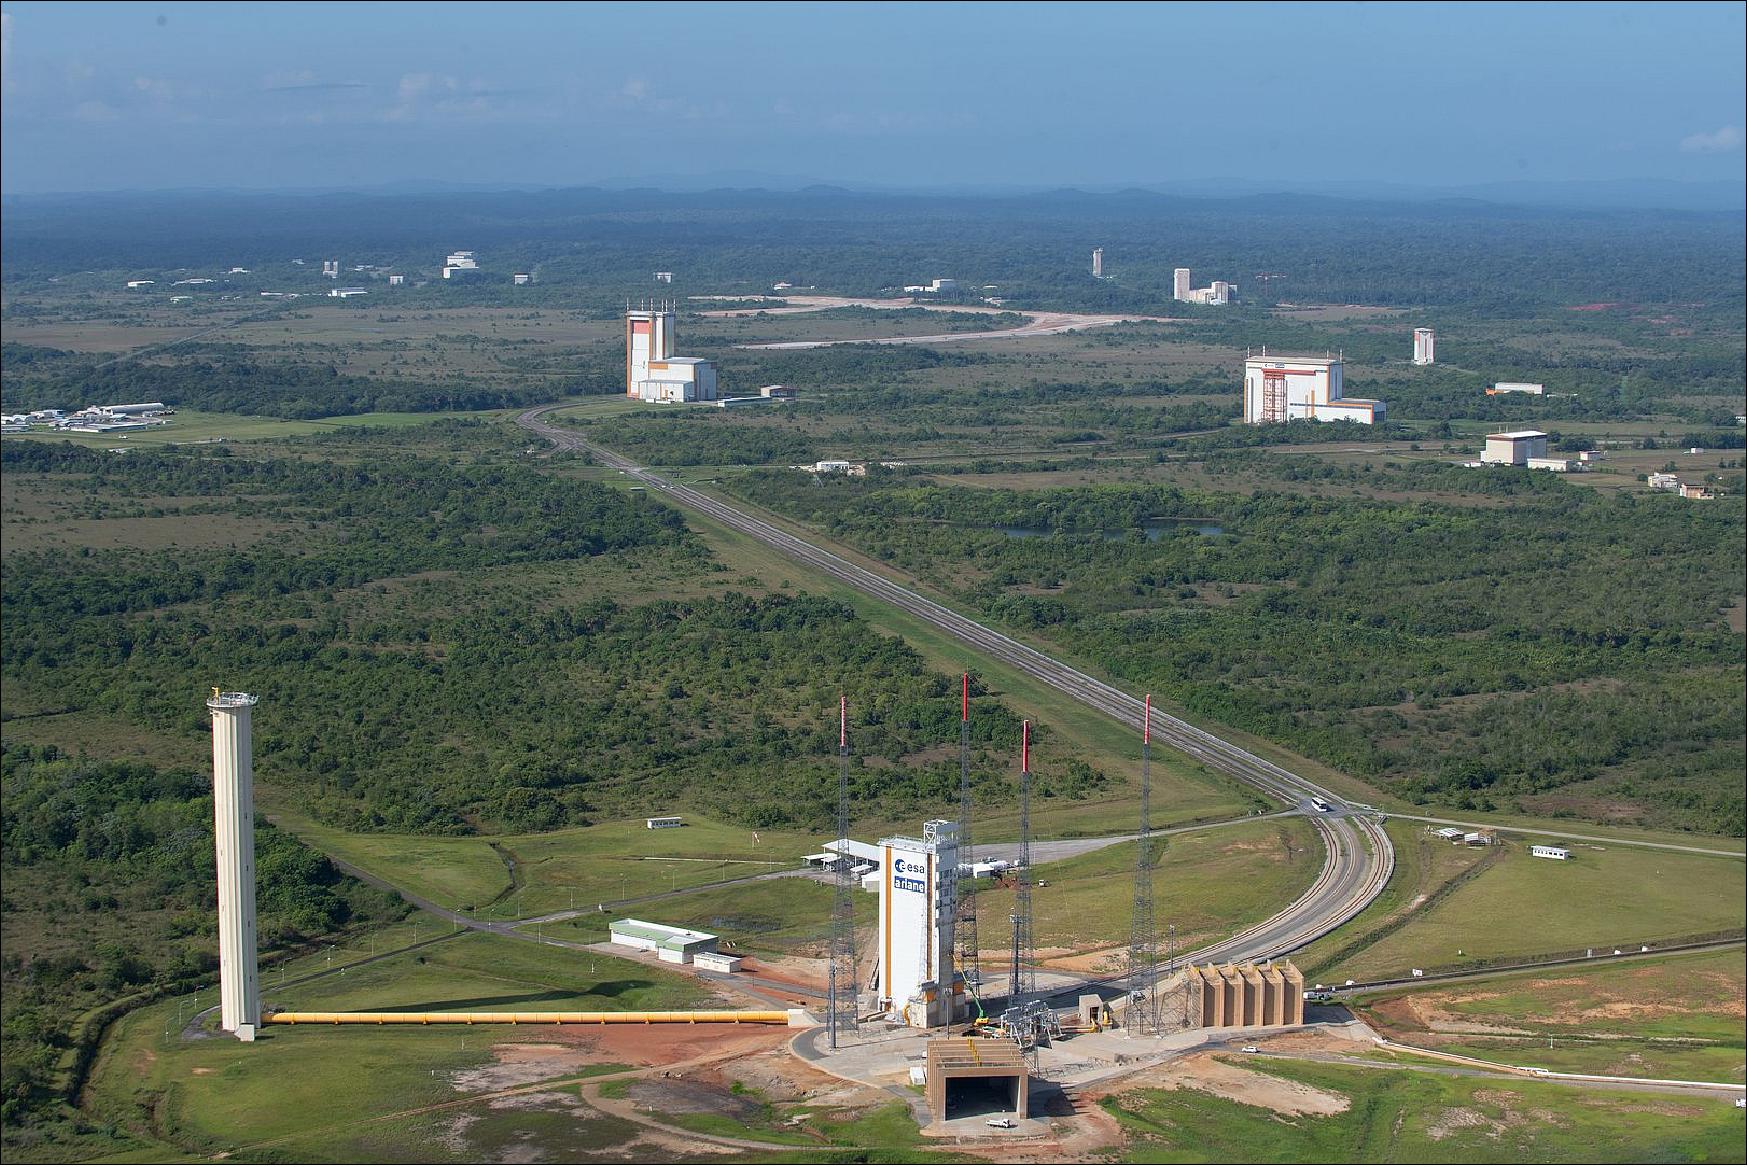 Figure 6: Europe's Spaceport in Kourou, French Guiana. The Ariane 5 launch pad in shown in the center foreground of the picture. Behind this, to the left is the Final Assembly Building where the launcher and it's payload are integrated and prepared for launch. Next to this on the right is the Launcher Integration Building. In the distance behind the Launcher Integration Building is the Booster Integration Building and the test stand for ground static test firing of solid rocket motors (image credit: ESA, S. Corvaja)